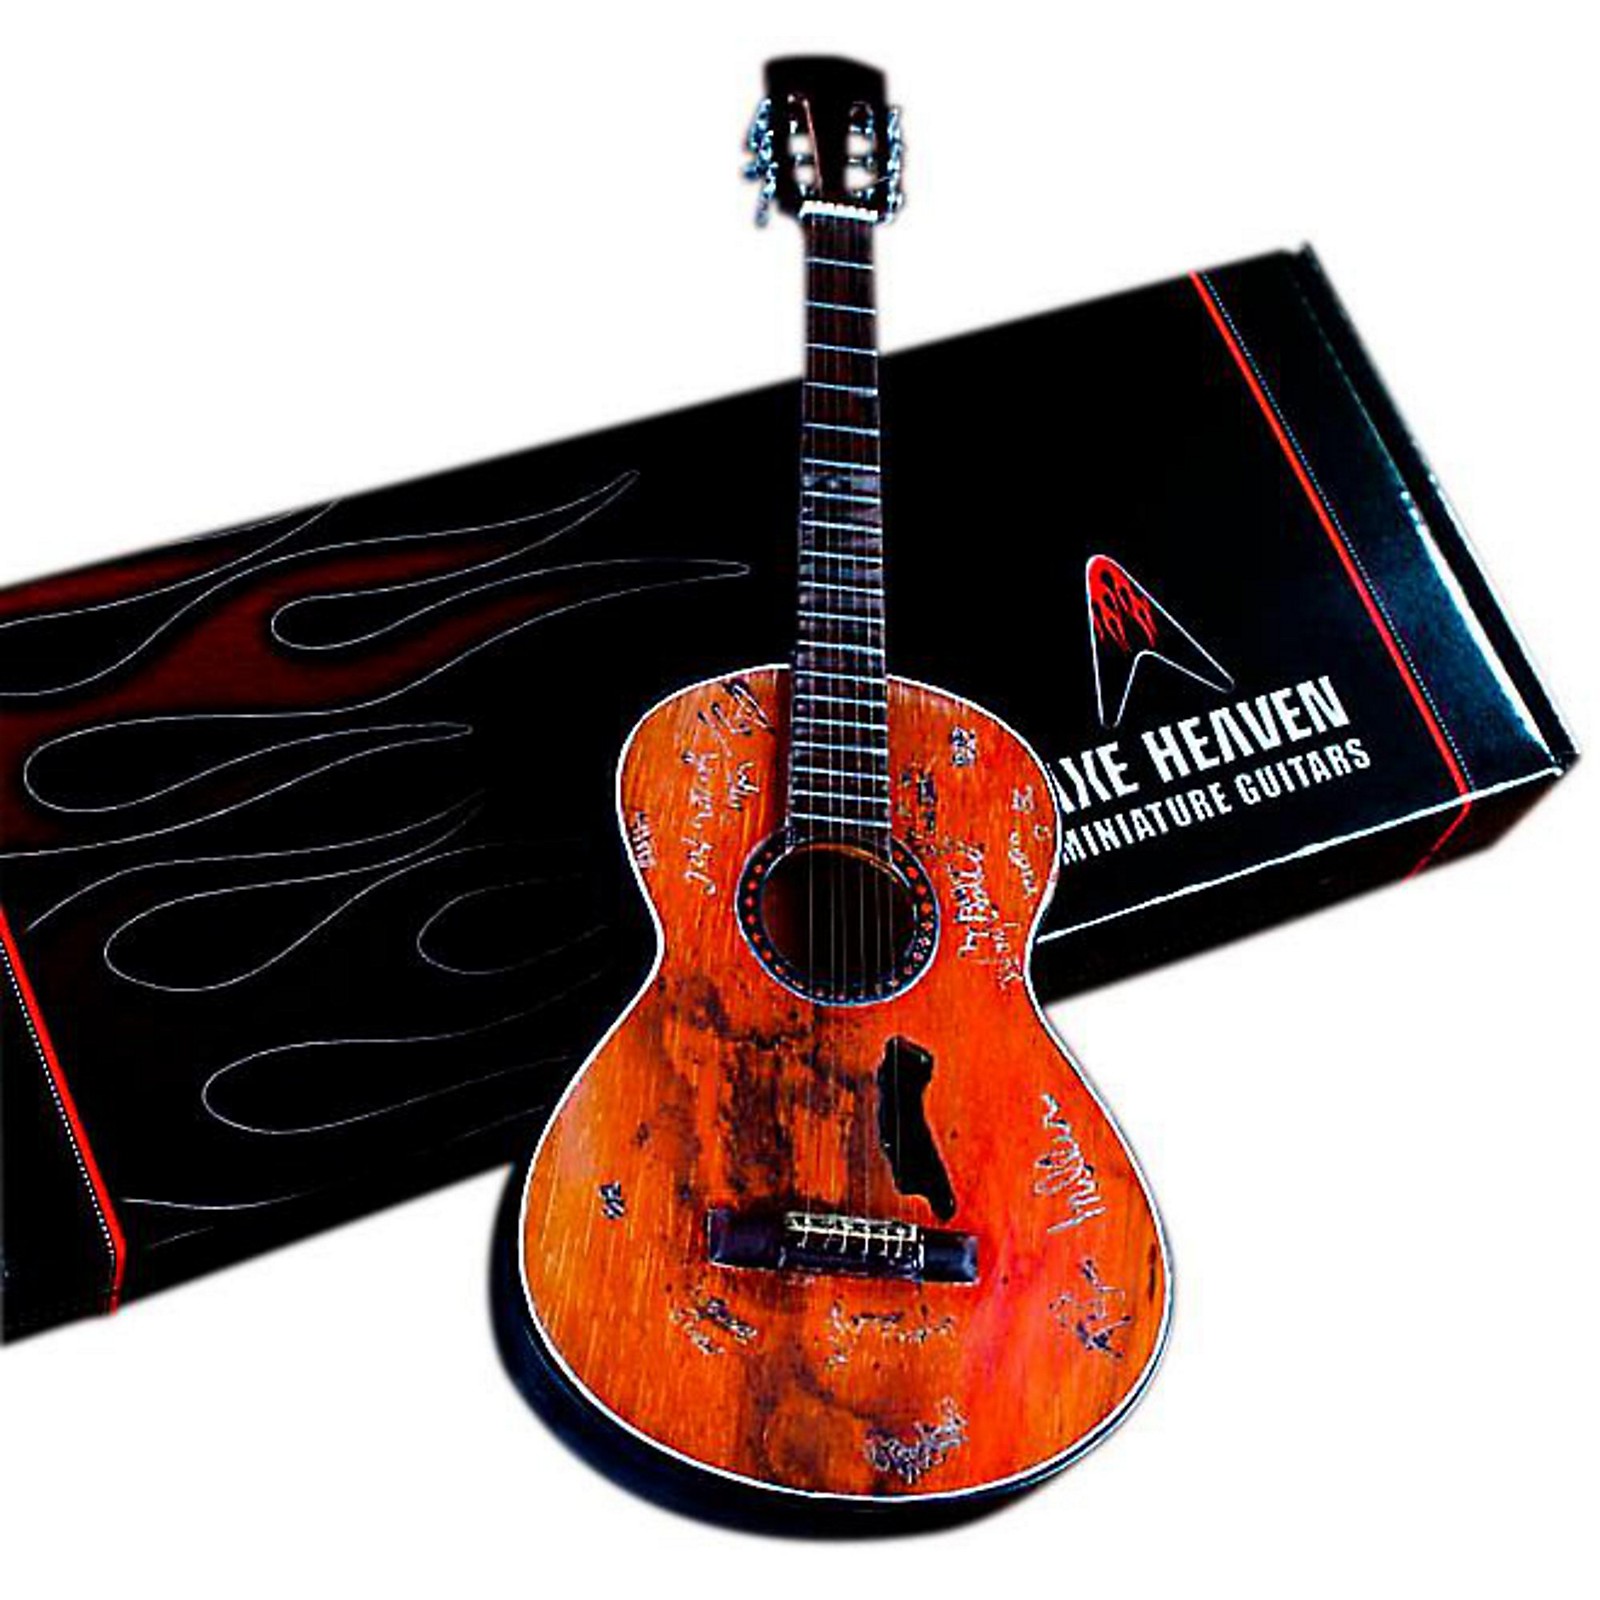 Axe Heaven Willie Nelson Signature Trigger Acoustic Miniature Guitar Replica Collectible 